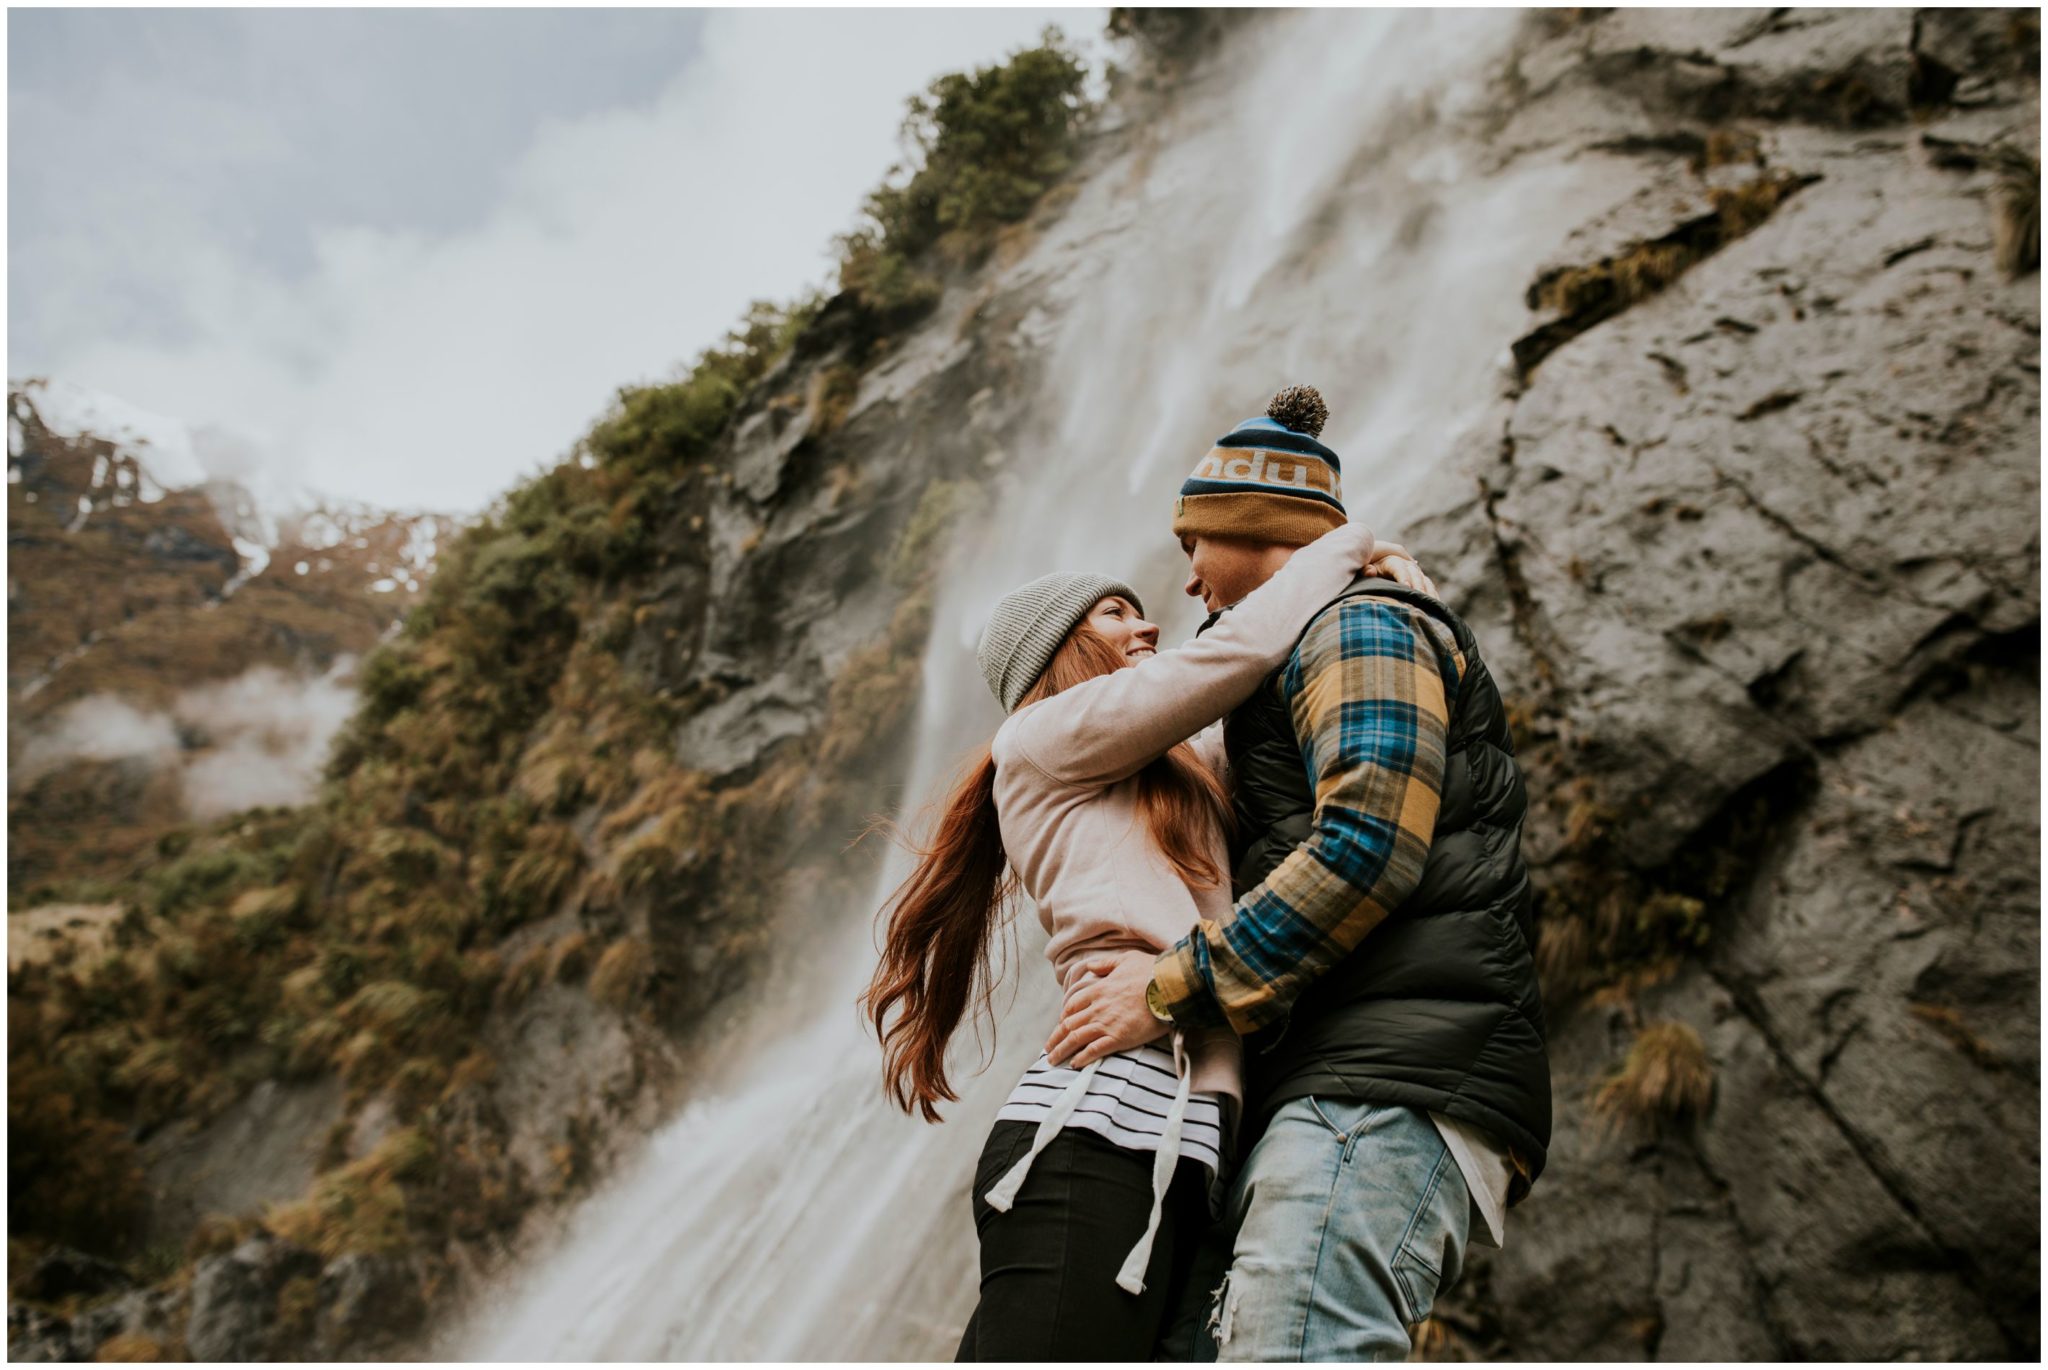 Charlotte Kiri Photography - Engagement Photography with a gorgeous couple embracing and smiling at each other, next to a misty romantic waterfall, in Wanaka, New Zealand